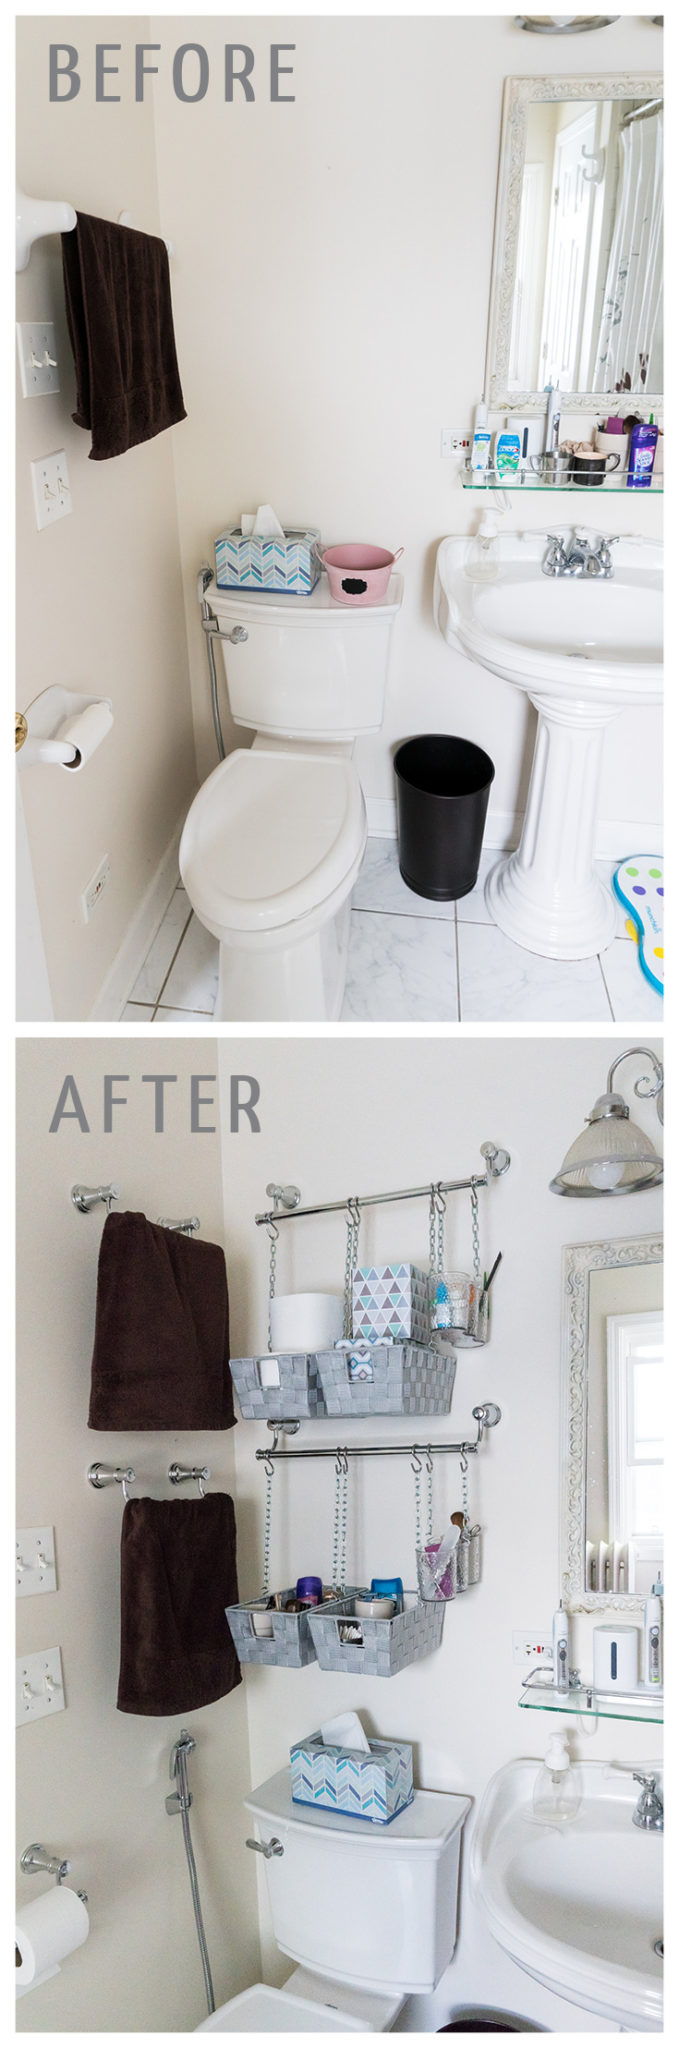 DIY Hanging Storage Bins For Over The Toilet Storage – Practically ...